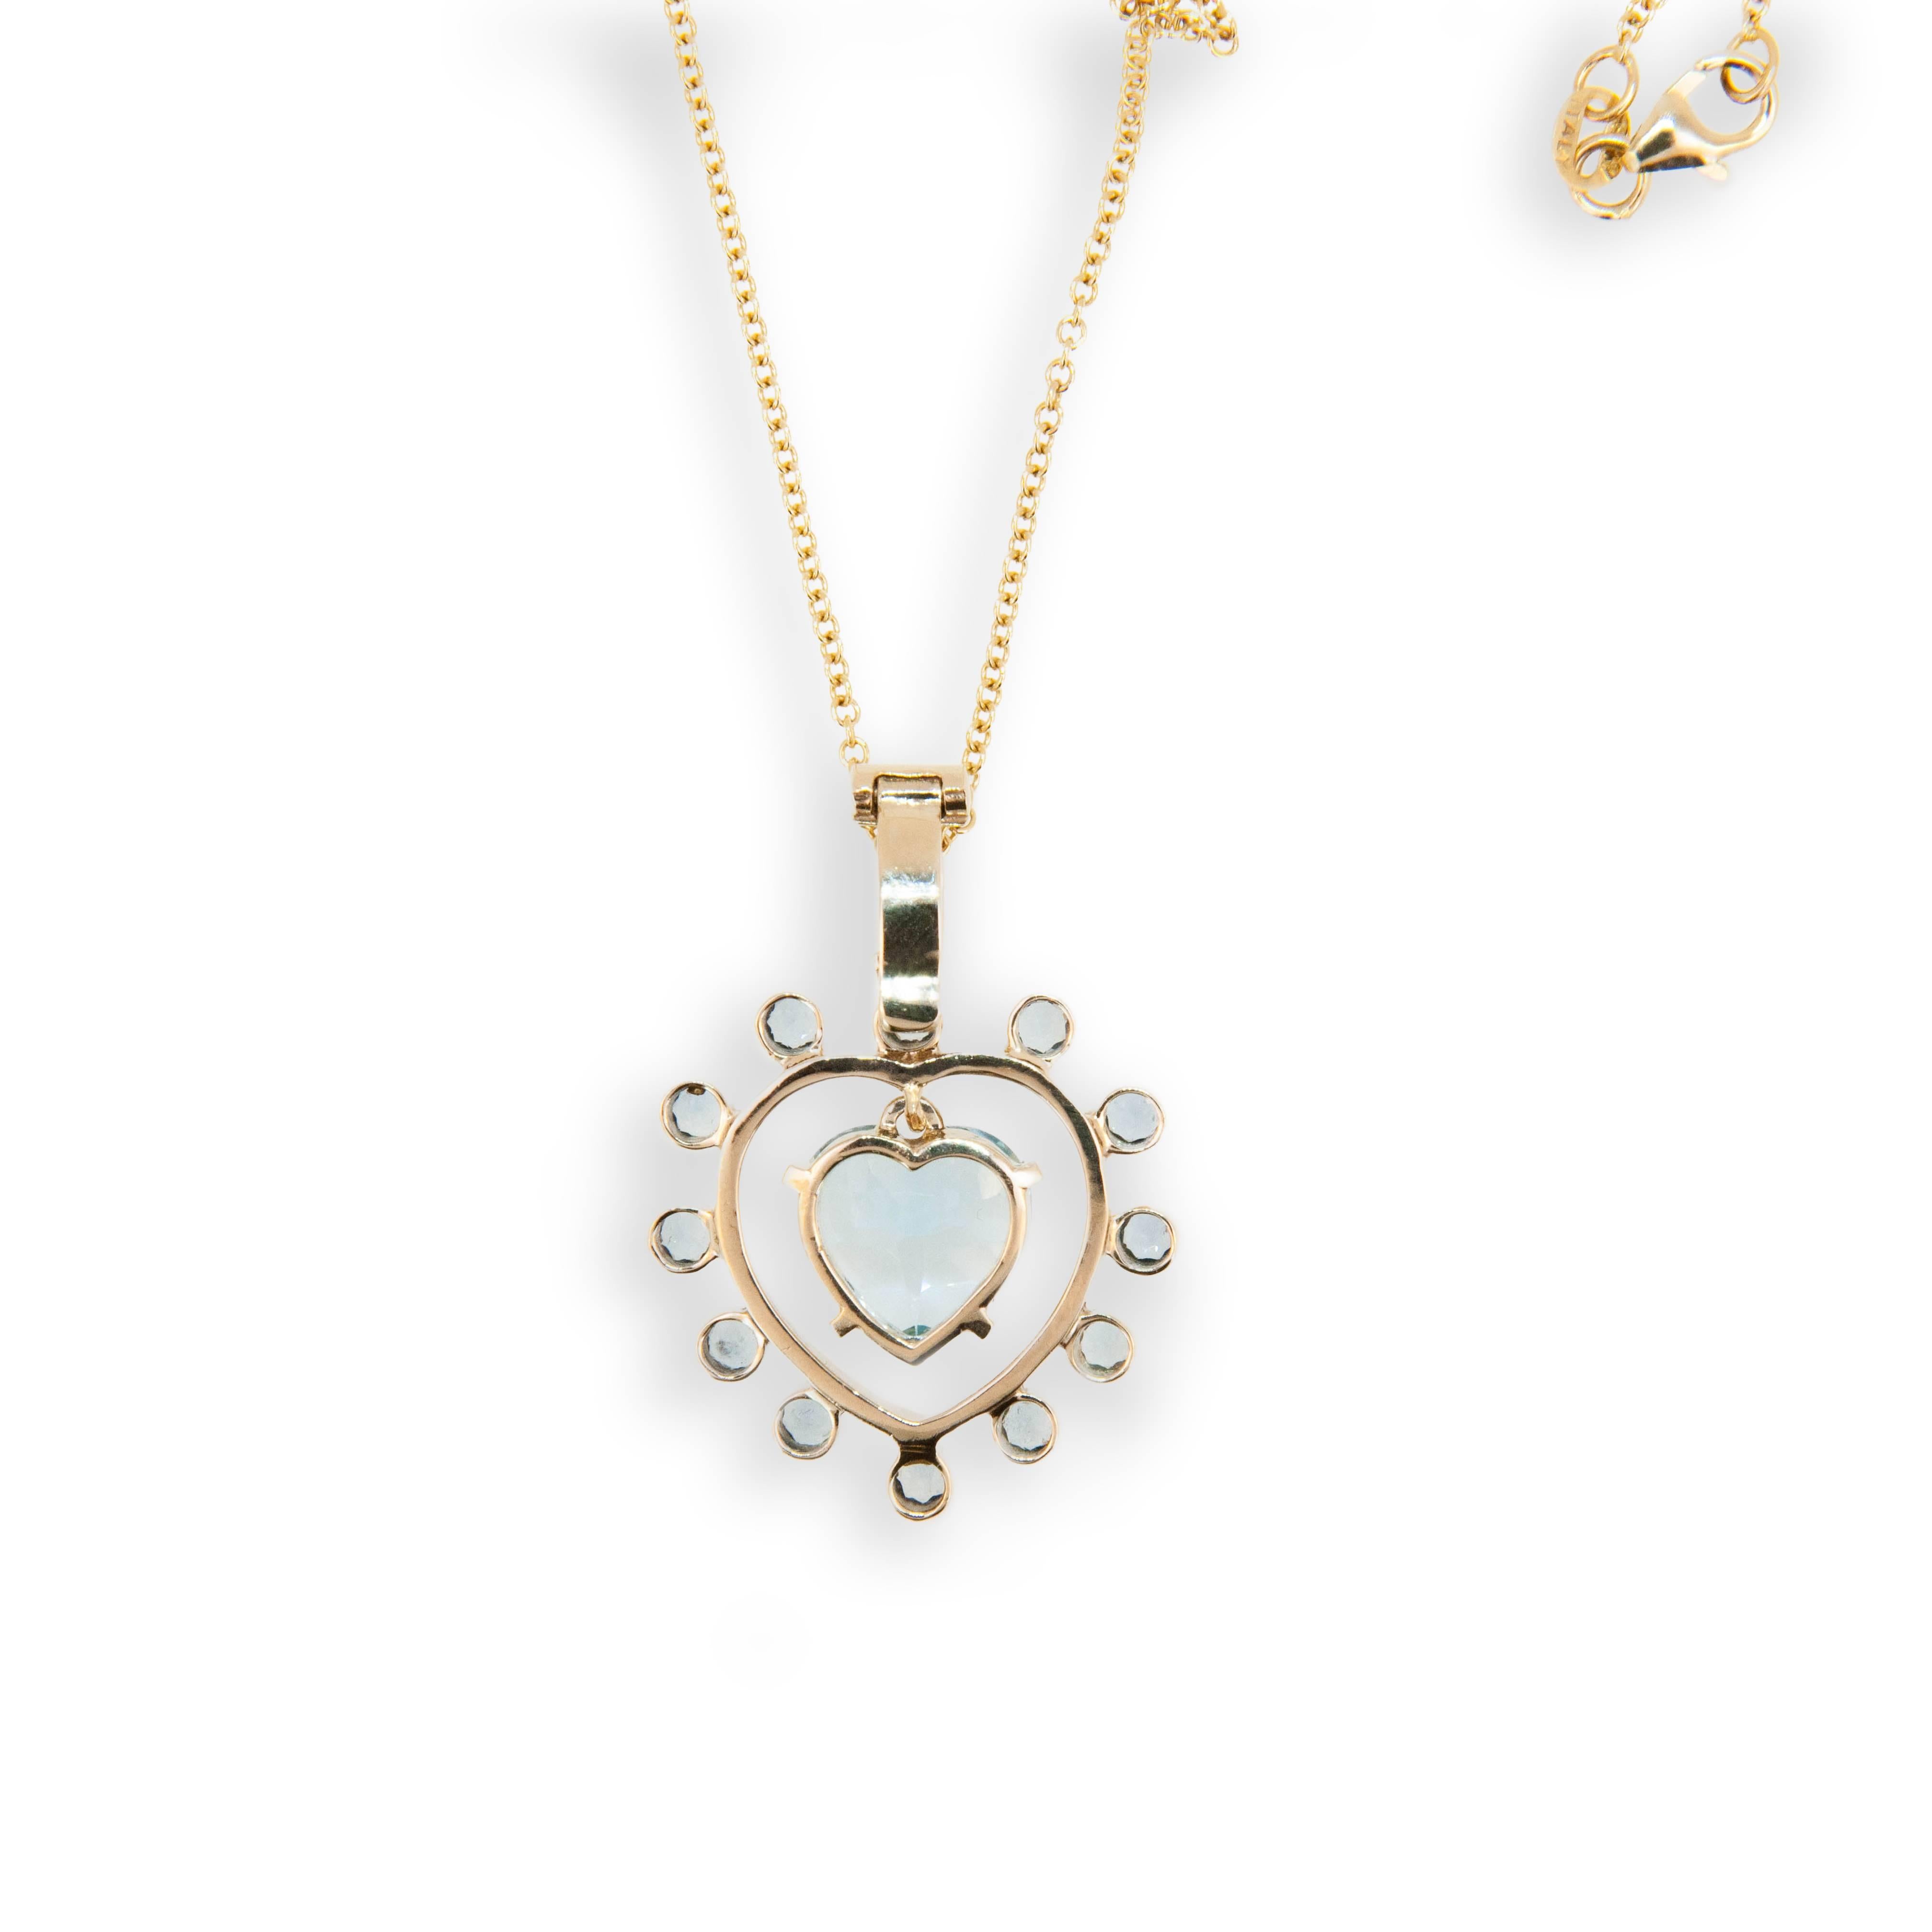 14 karat yellow gold Sweetheart pendant; heart shaped Blue Topaz 5.94 carats surrounded by twelve 2.8 mm round faceted blue topaz  .99 carats total weight round blue topaz. Heart shaped blue topaz swings freely in center. Pendant bail opens and